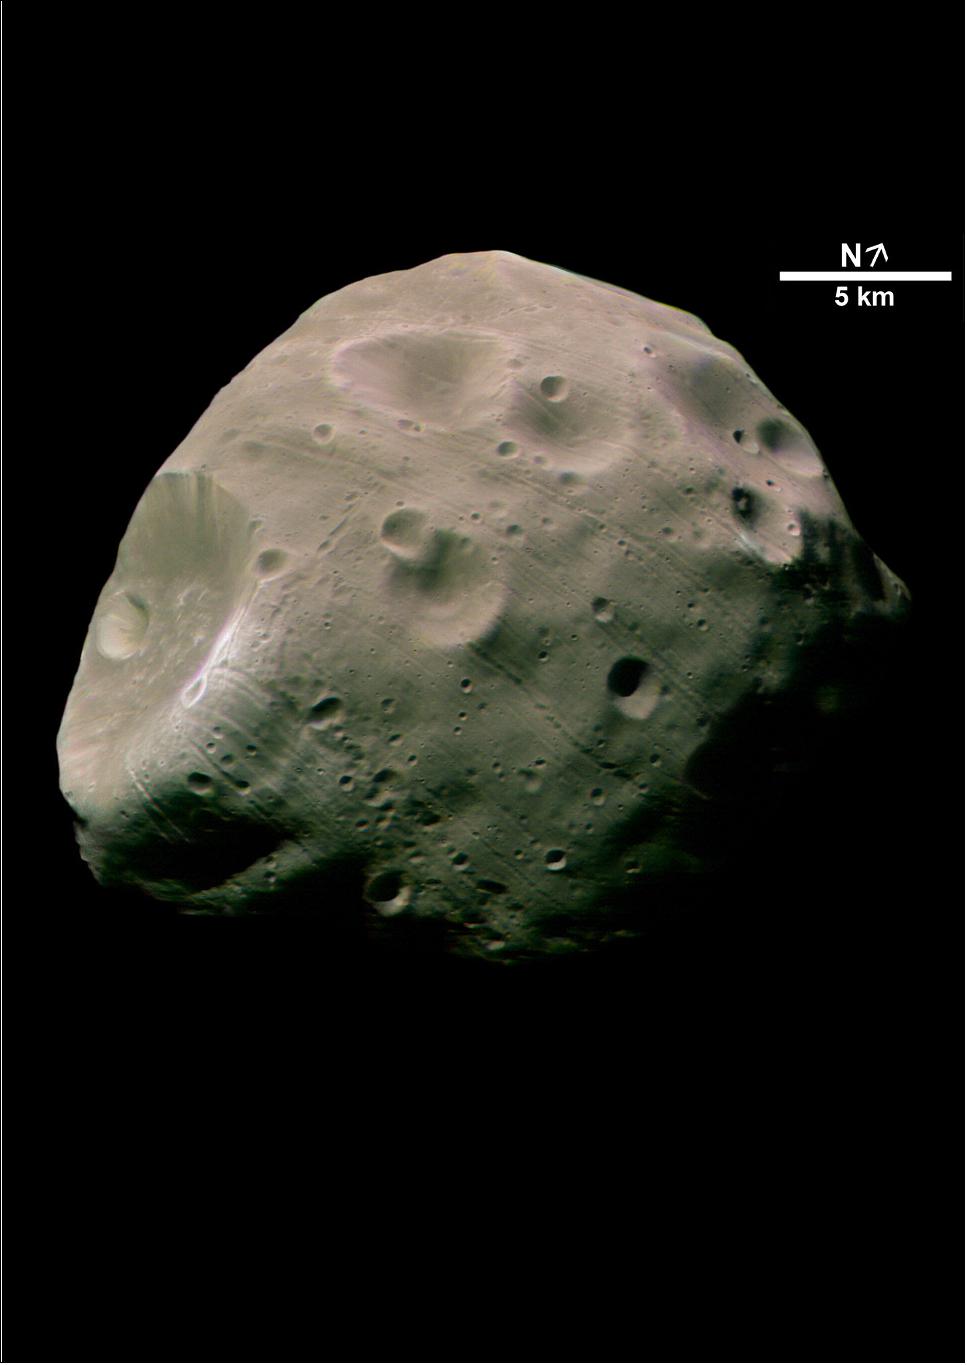 Figure 42: This image, taken by the High Resolution Stereo Camera (HRSC) on board ESA’s Mars Express spacecraft, is one of the highest-resolution pictures so far of the Martian moon Phobos. The image shows the Mars-facing side of the moon, taken from a distance of less than 200 km with a resolution of about seven meters per pixel during orbit 756, on 22 August 2004. This color image was calculated from the three color channels and the nadir channel on the HRSC. Due to geometric reasons the scale bar is only valid for the center of the image (image credit: ESA/DLR/FU Berlin (G. Neukum), CC BY-SA 3.0 IGO)